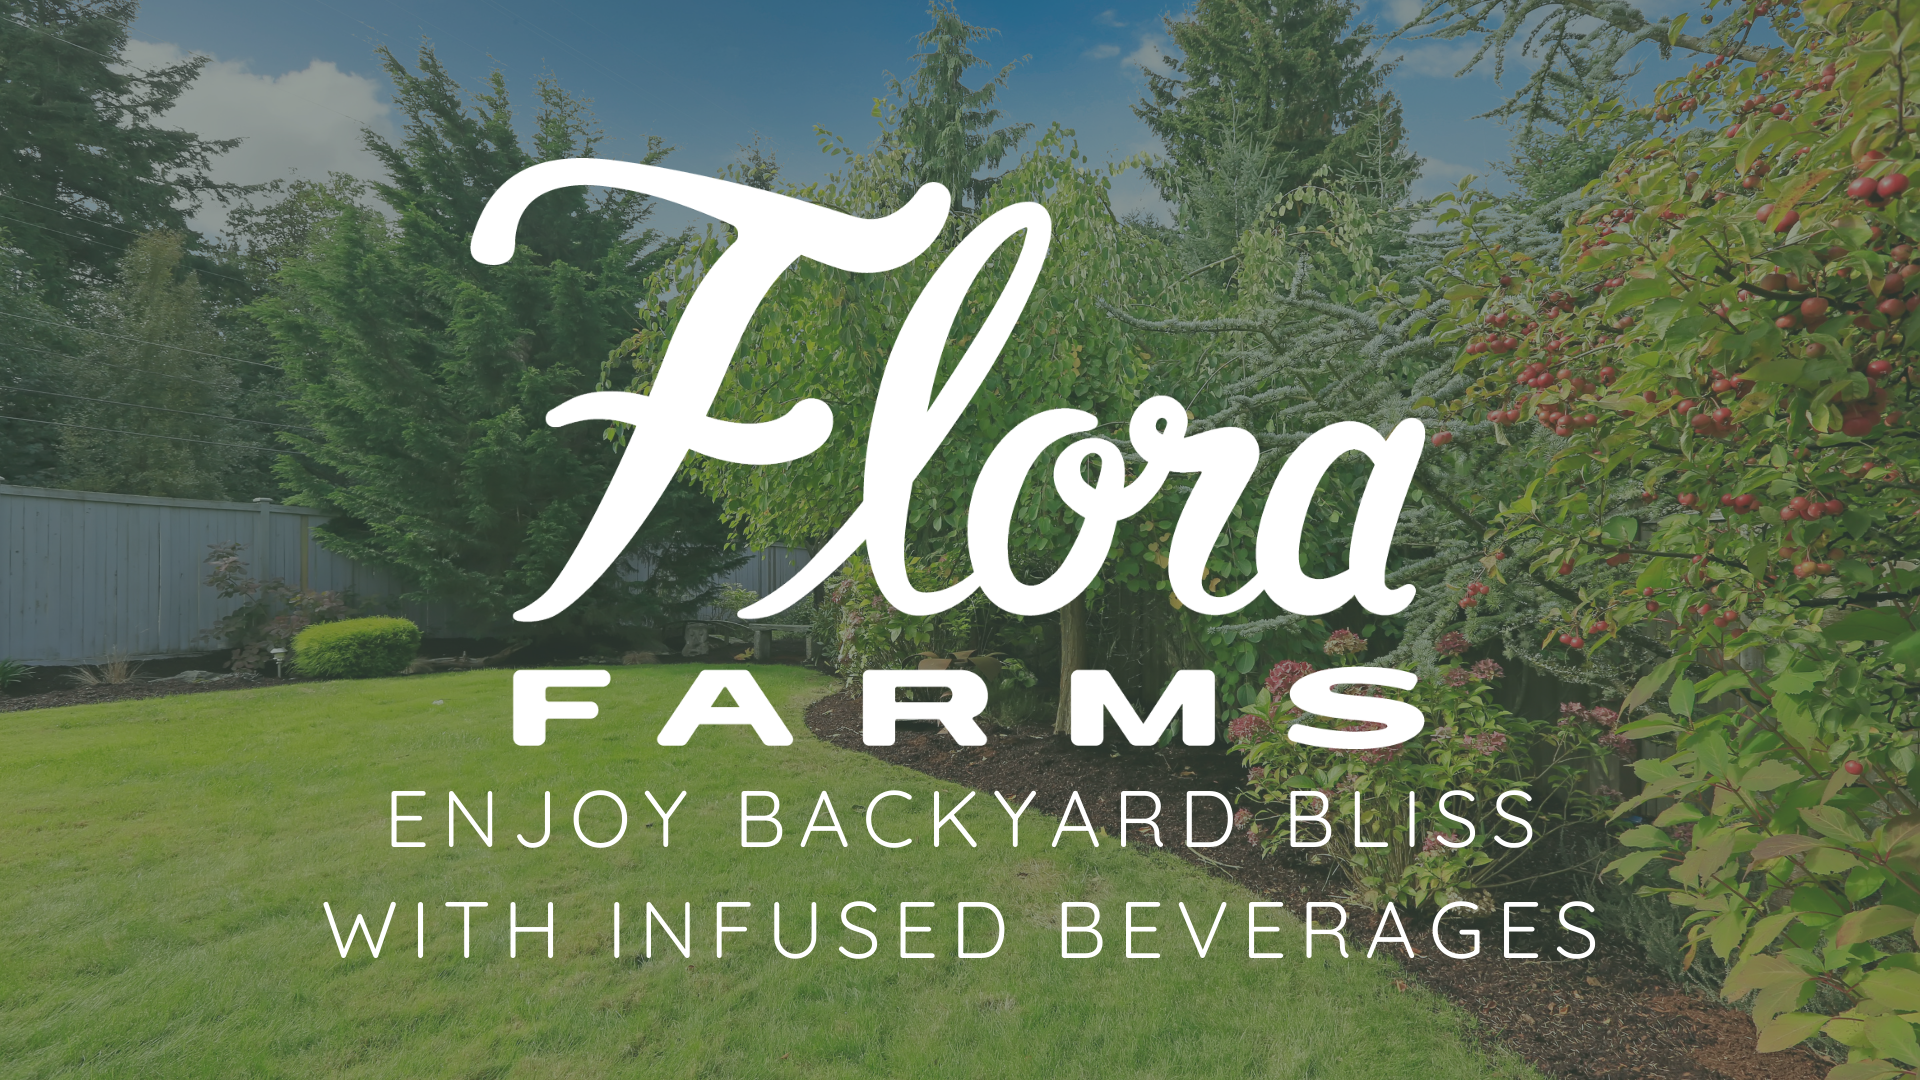 Enjoy Backyard Bliss with Infused Beverages